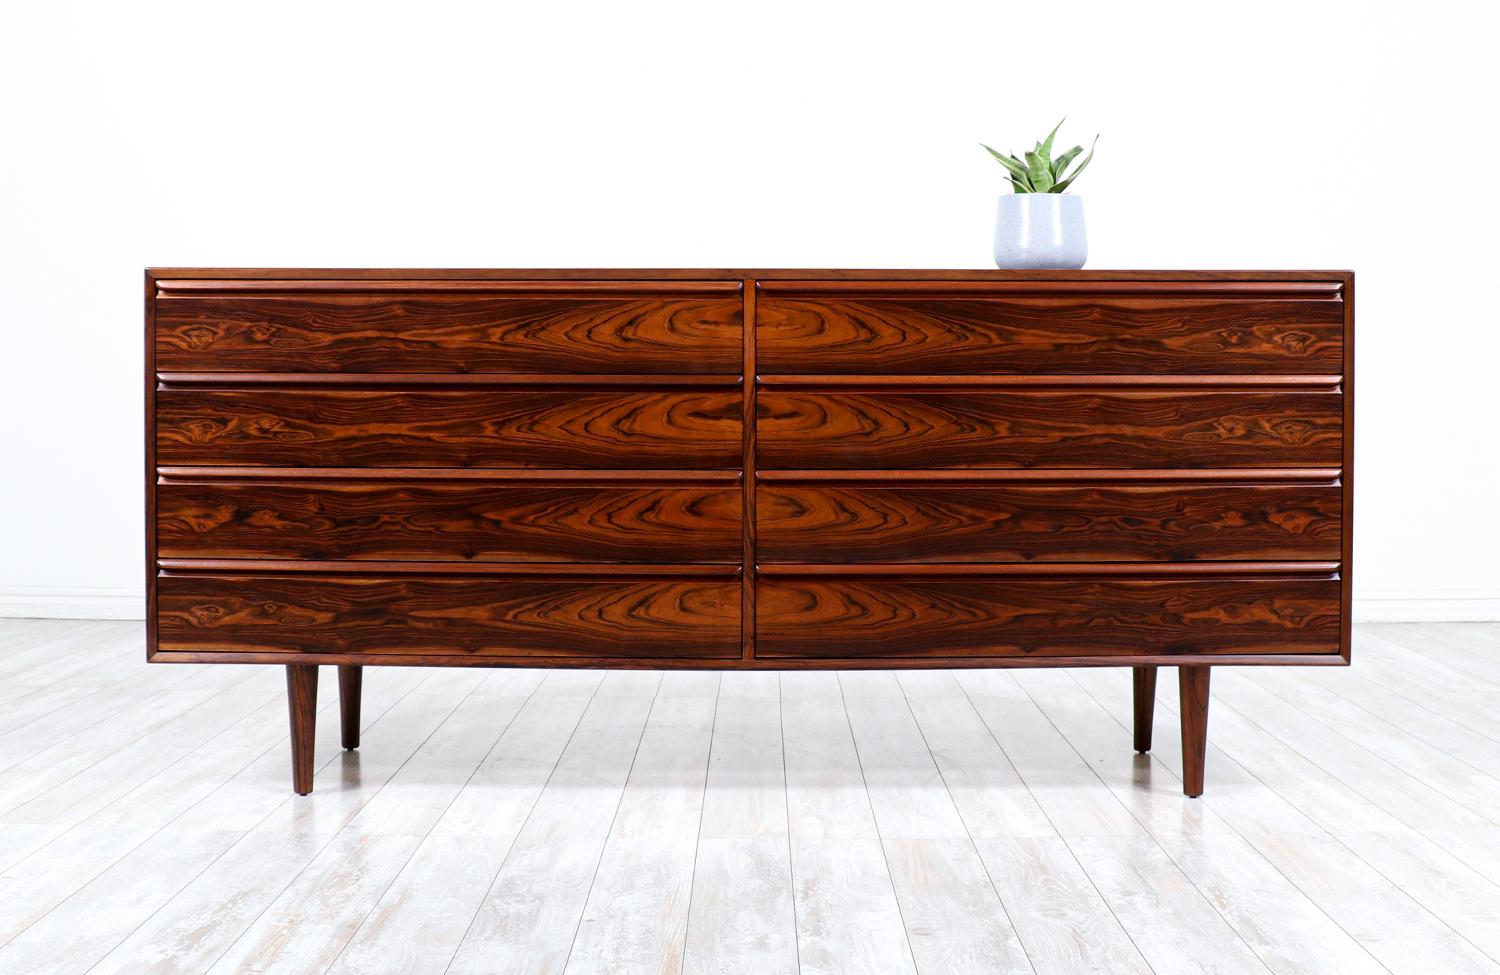 Elegant modern dresser designed and manufactured by Westnofa Furniture in Norway circa 1960s. This classic Norwegian minimalist design features an exotic Brazilian rosewood frame with eight dovetailed drawers. Each drawer is accented with Westnofa’s